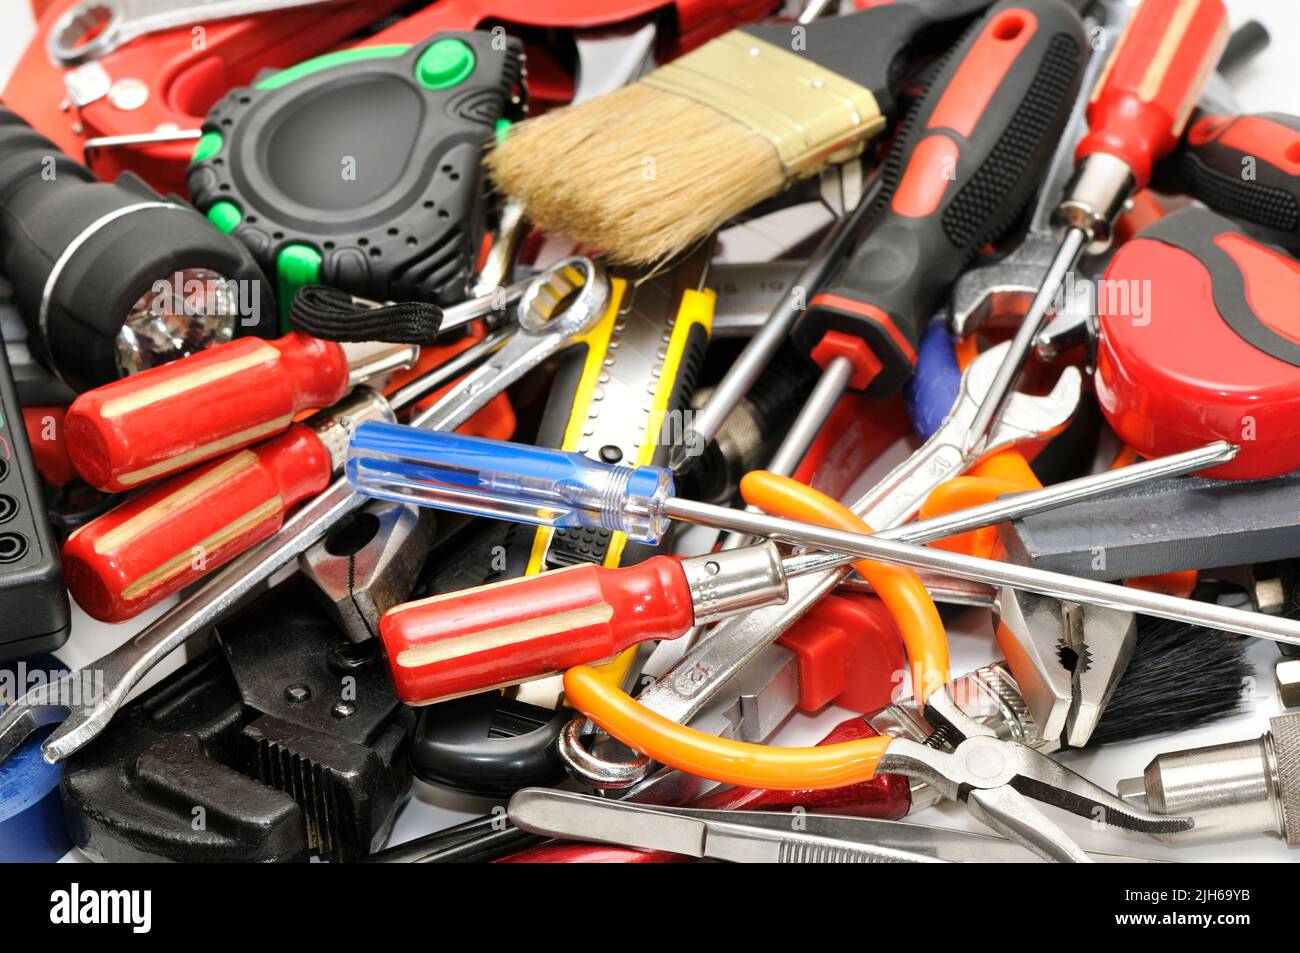 Large pile various hand tools Stock Photo